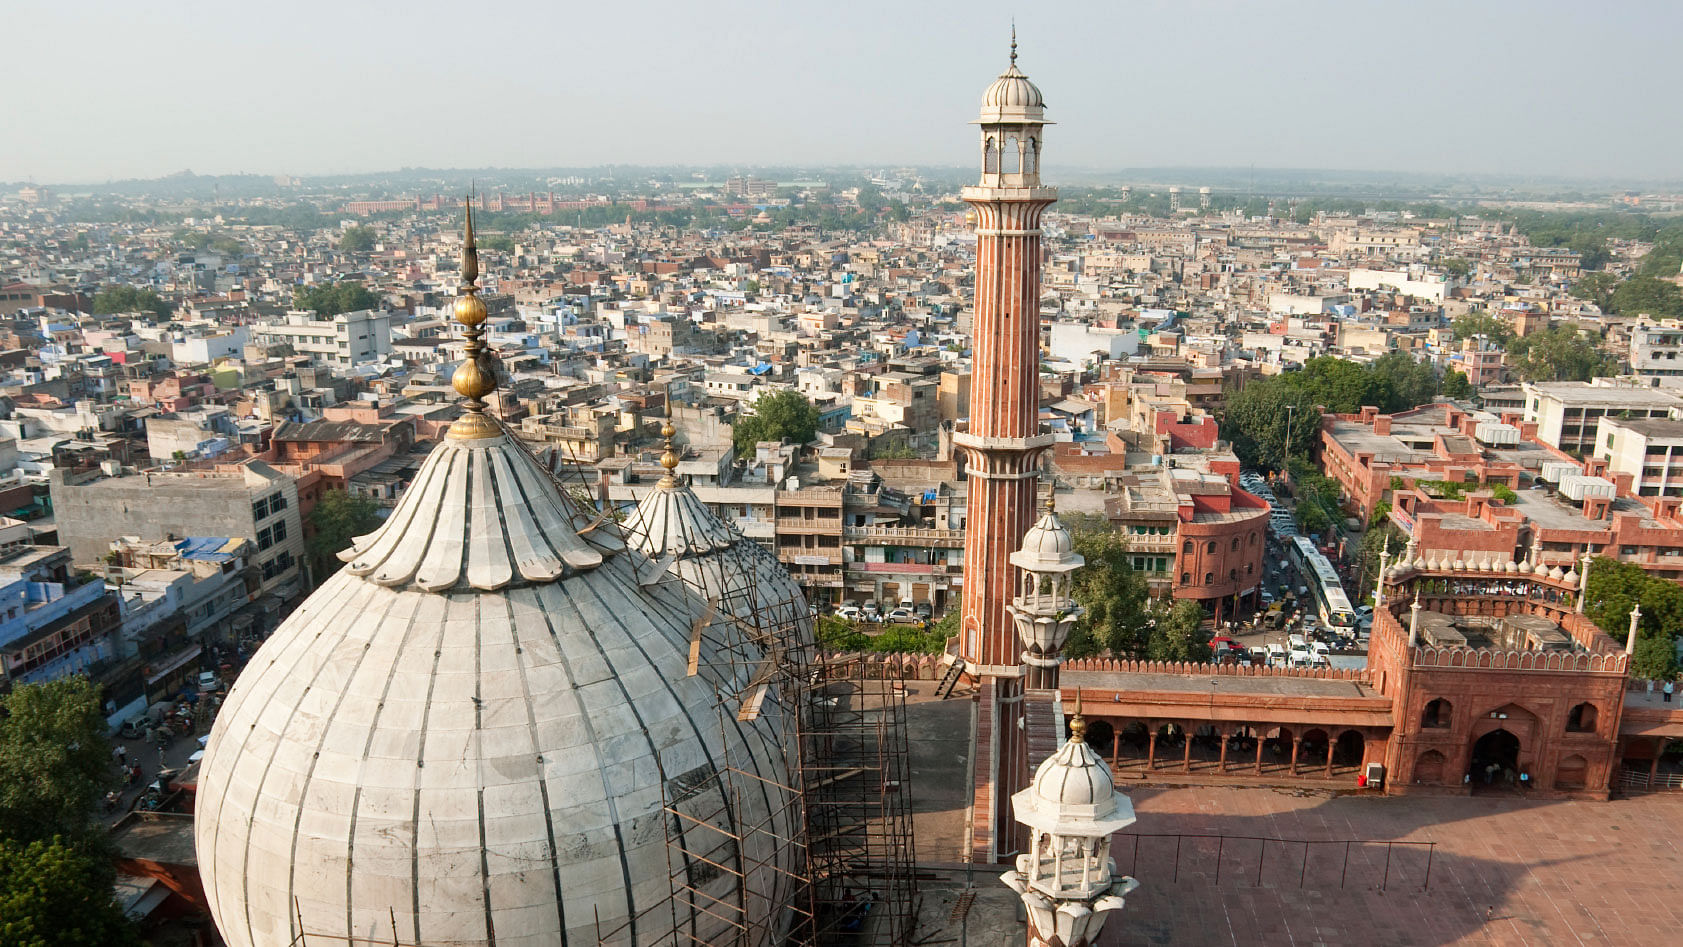 Aerial view of Old Delhi from Jama Masjid, built by the Mughals. (Photo: iStock)